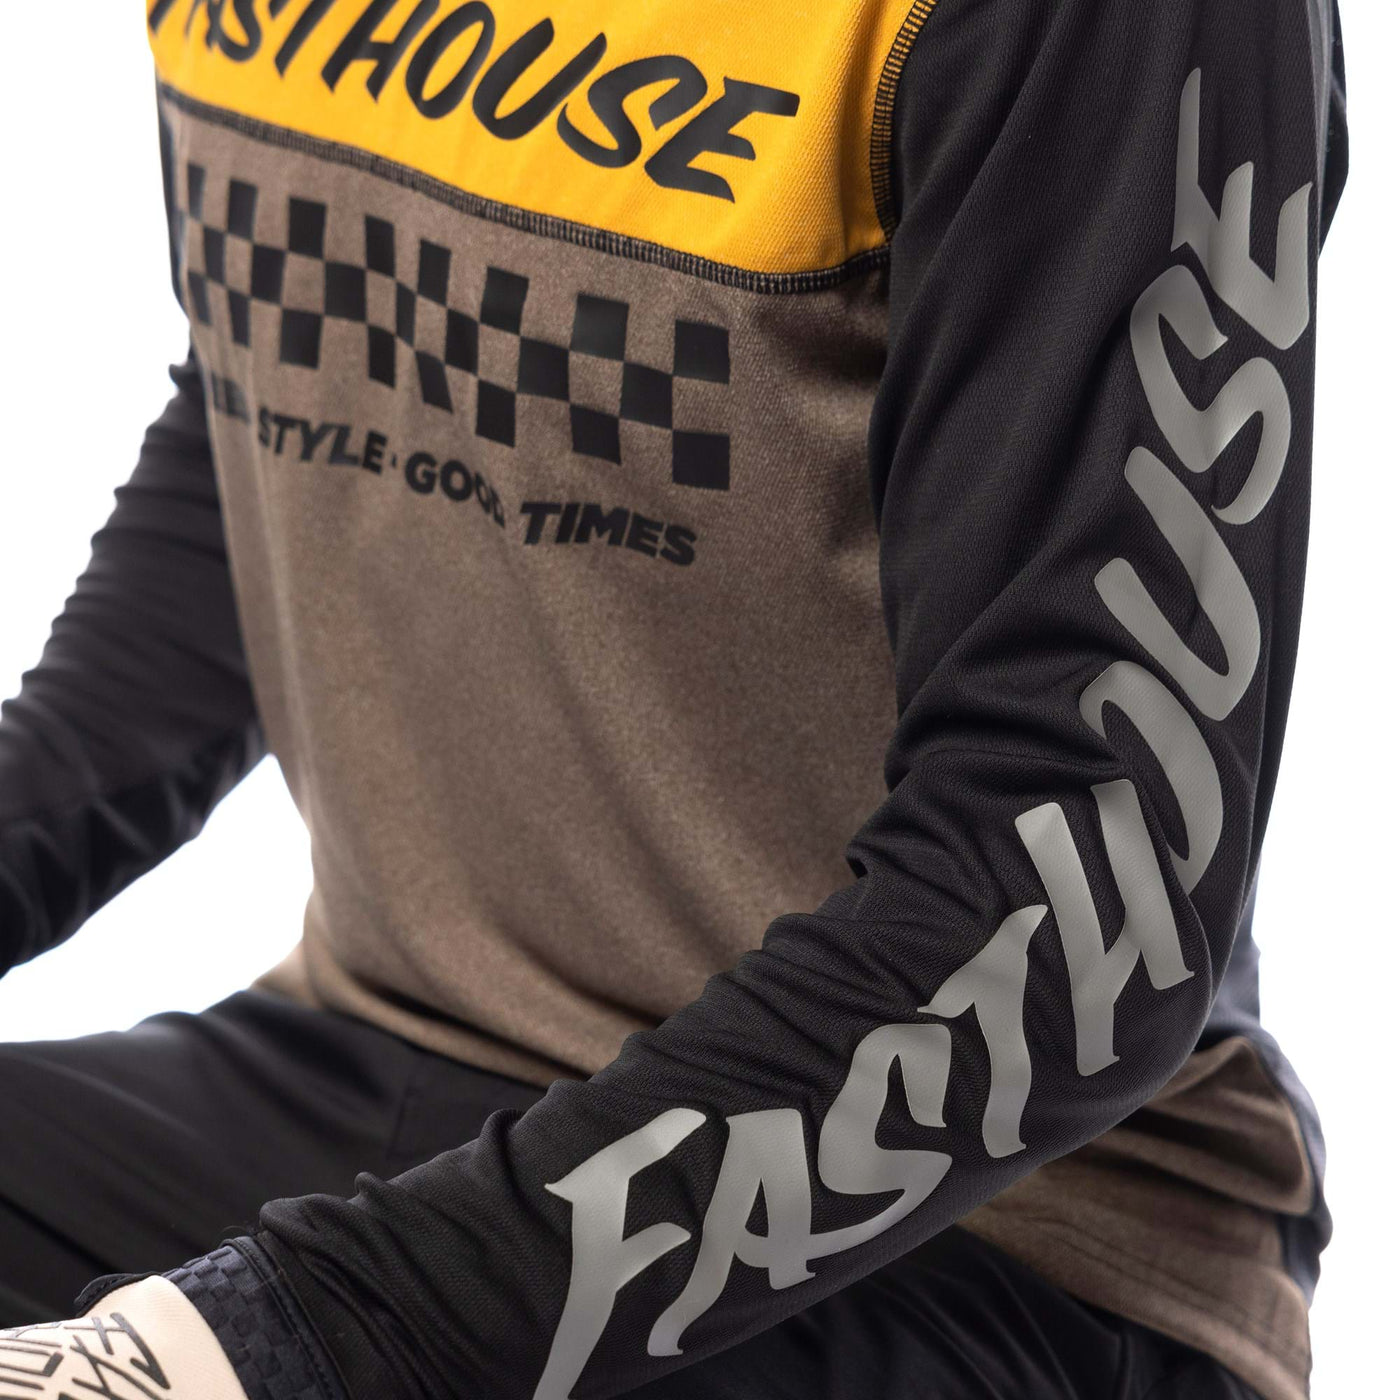 FASTHOUSE ALLOY MESA LONG SLEEVE JERSEY - HEATHER/GOLD